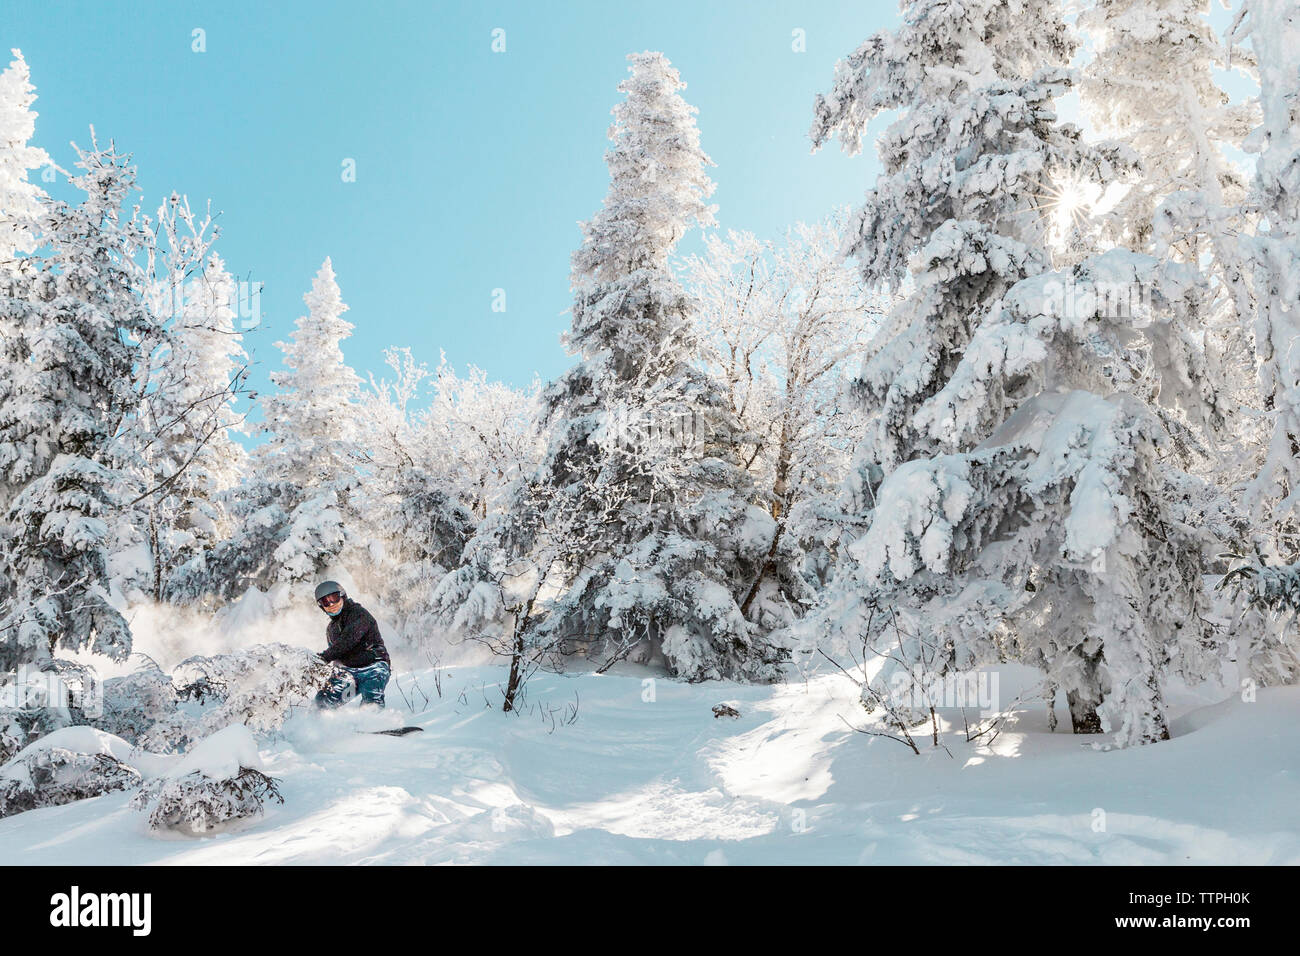 Man snowboarding on snow against trees during winter Stock Photo